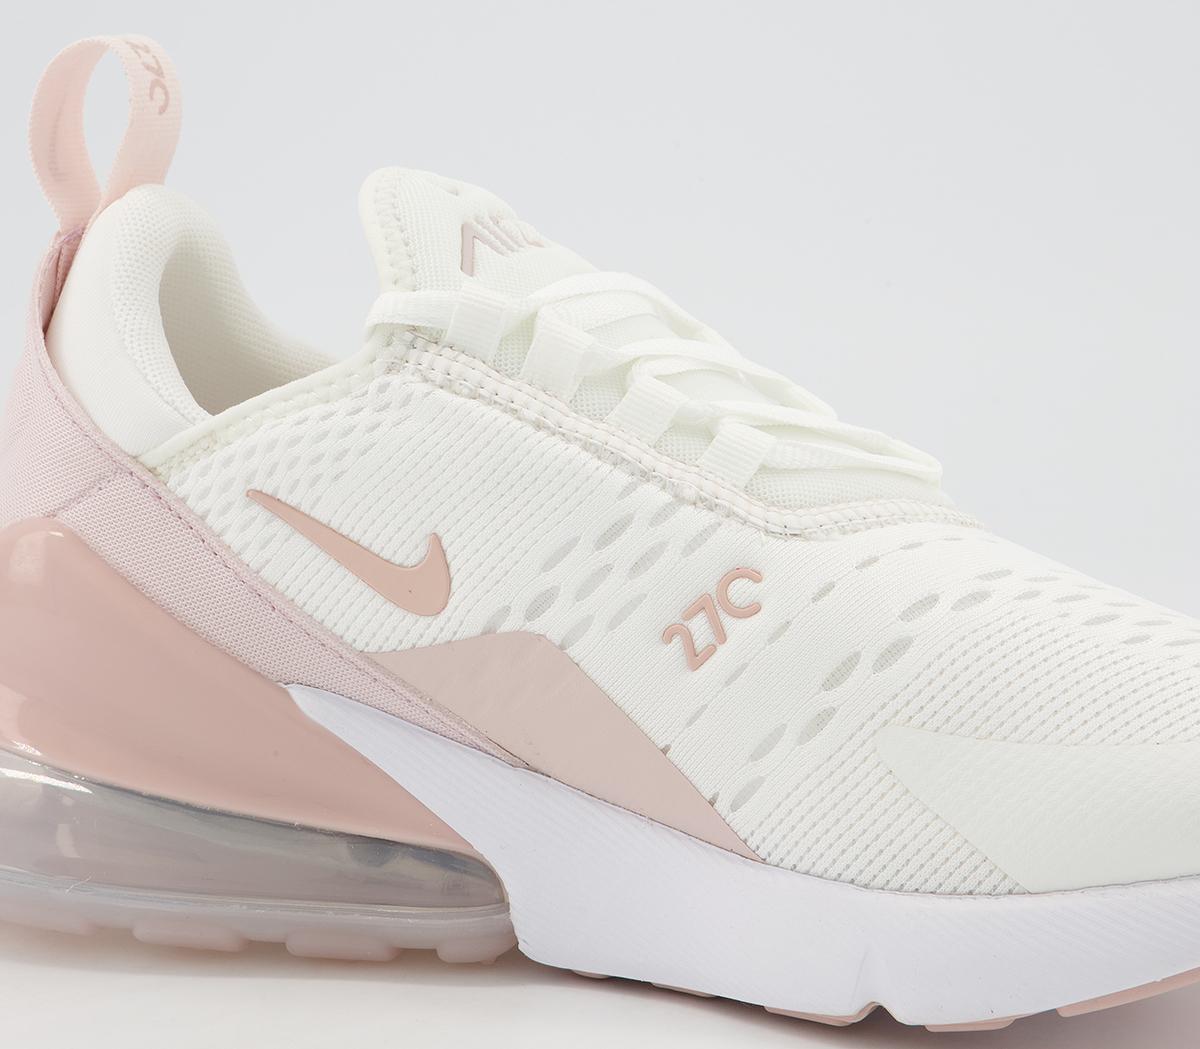 Nike Air Max 270 Trainers Summit White Pink Oxford Barely Rose - Hers ...